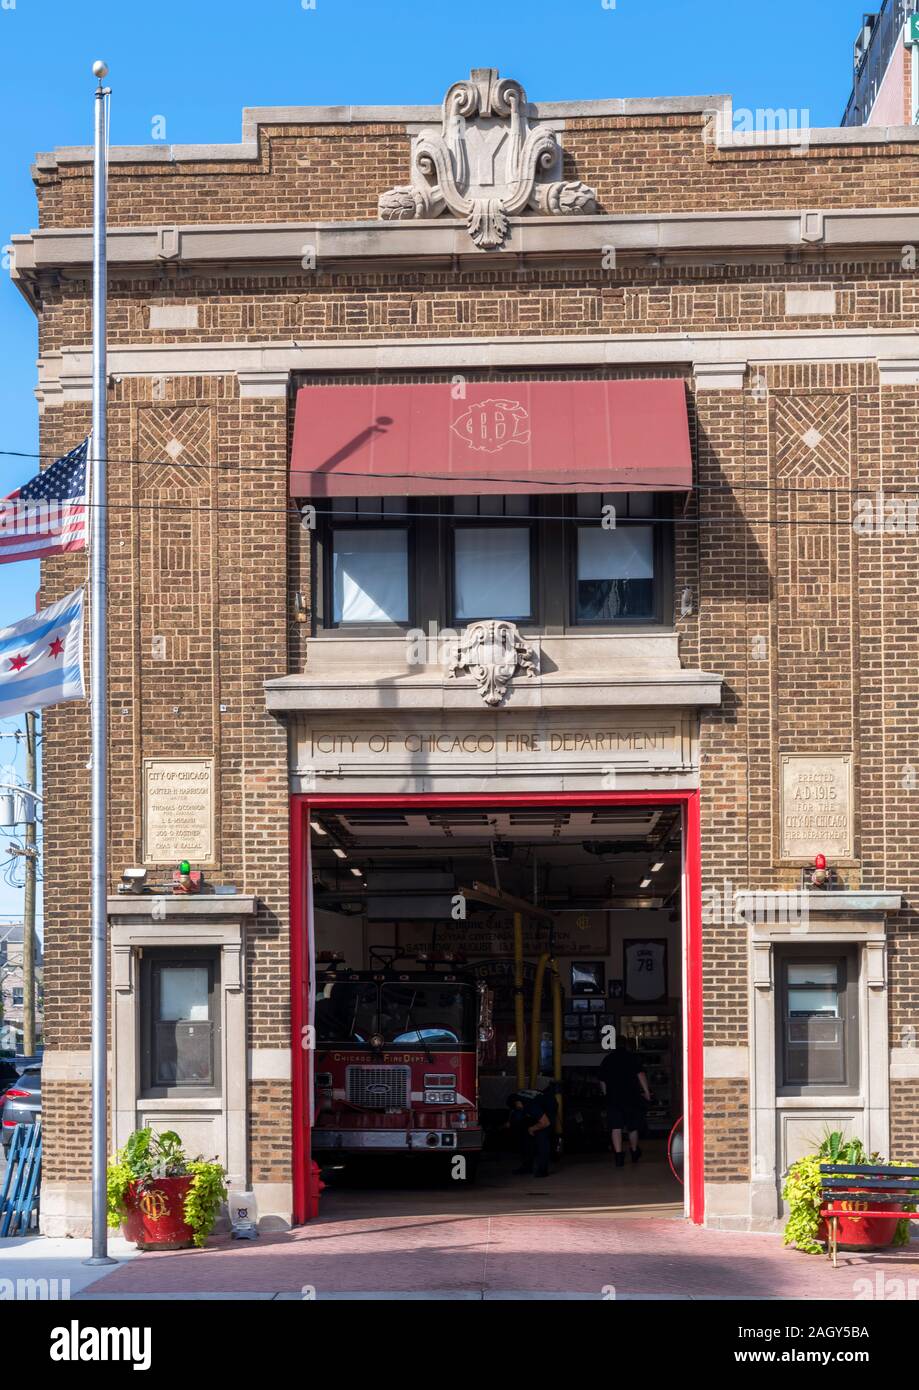 City of Chicago Fire Department fire station outside Wrigley Field baseball park, Chicago, Illinois, USA Stock Photo